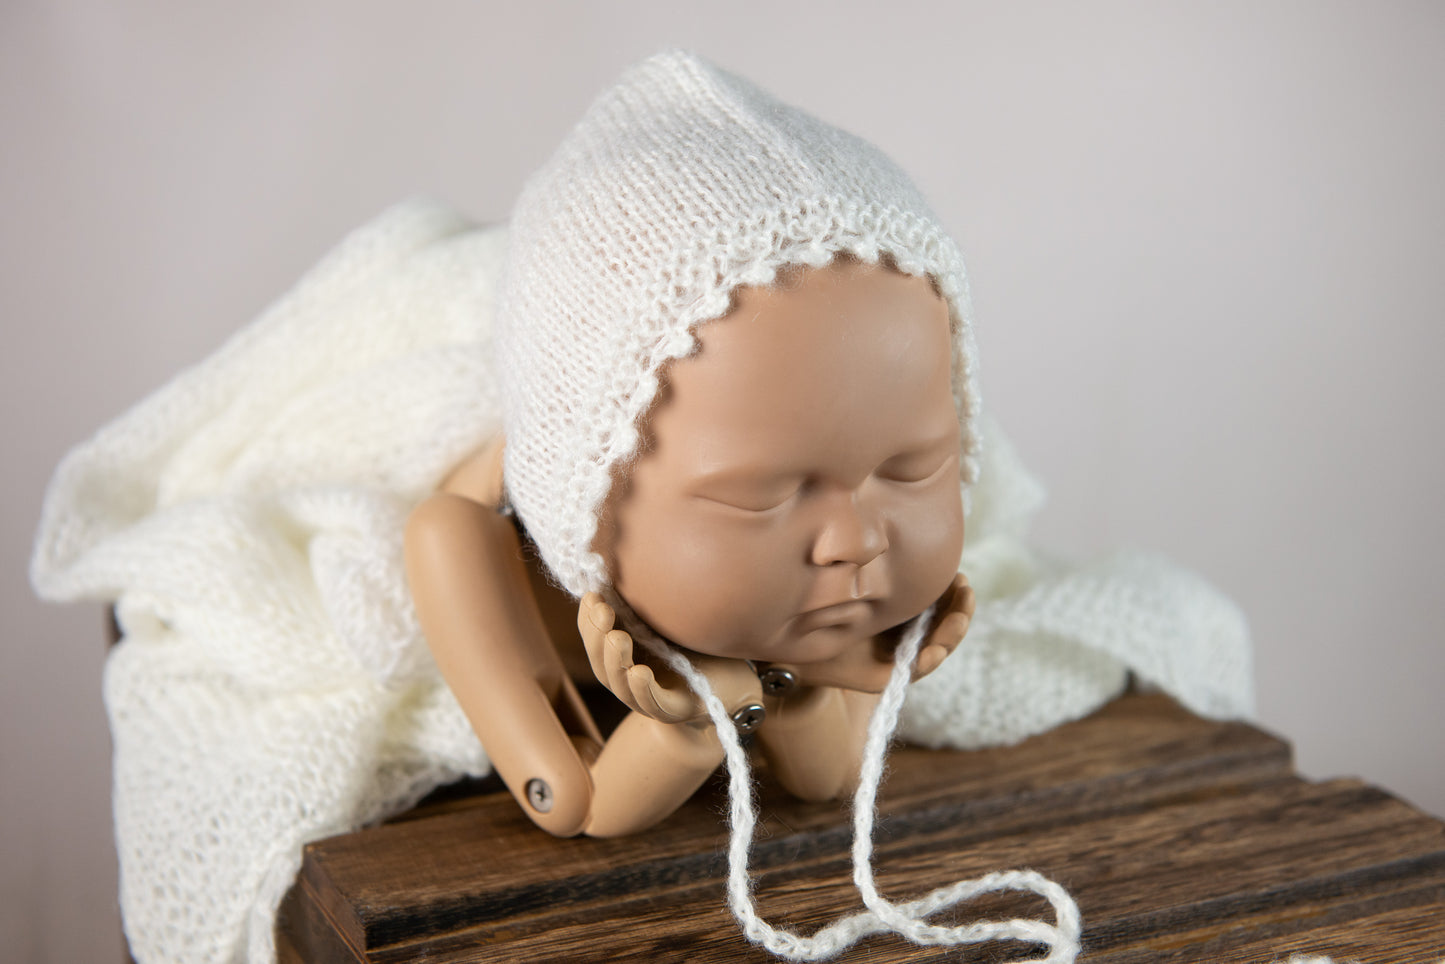 Sleeping doll in gray knit bonnet with matching wrap as cozy newborn photography prop.